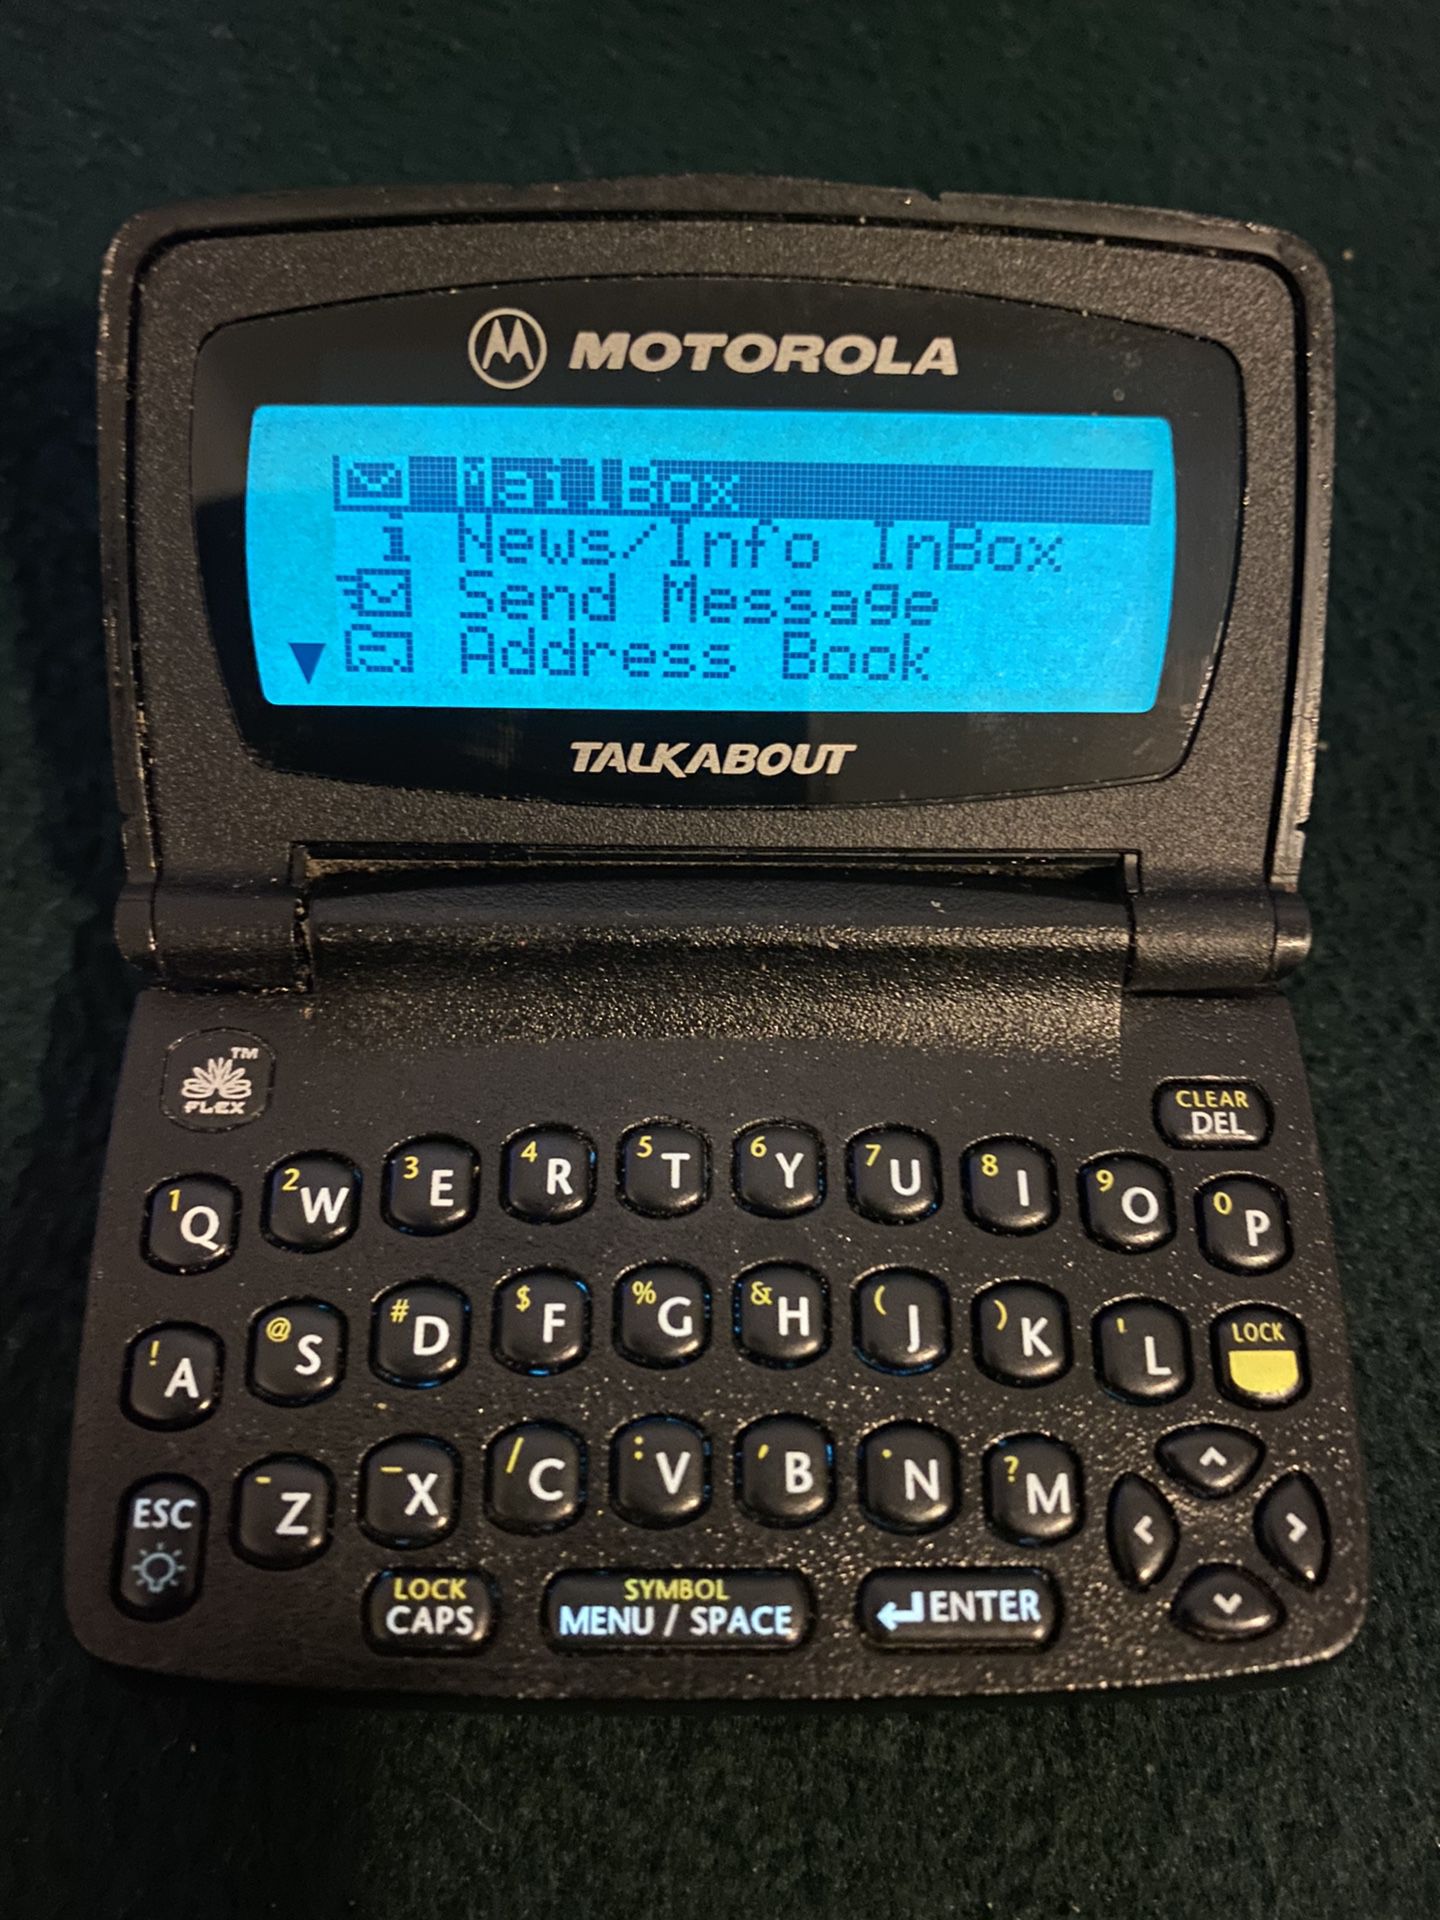 Motorola 2 Way TalkAbout Pager 📟 vintage with power functions